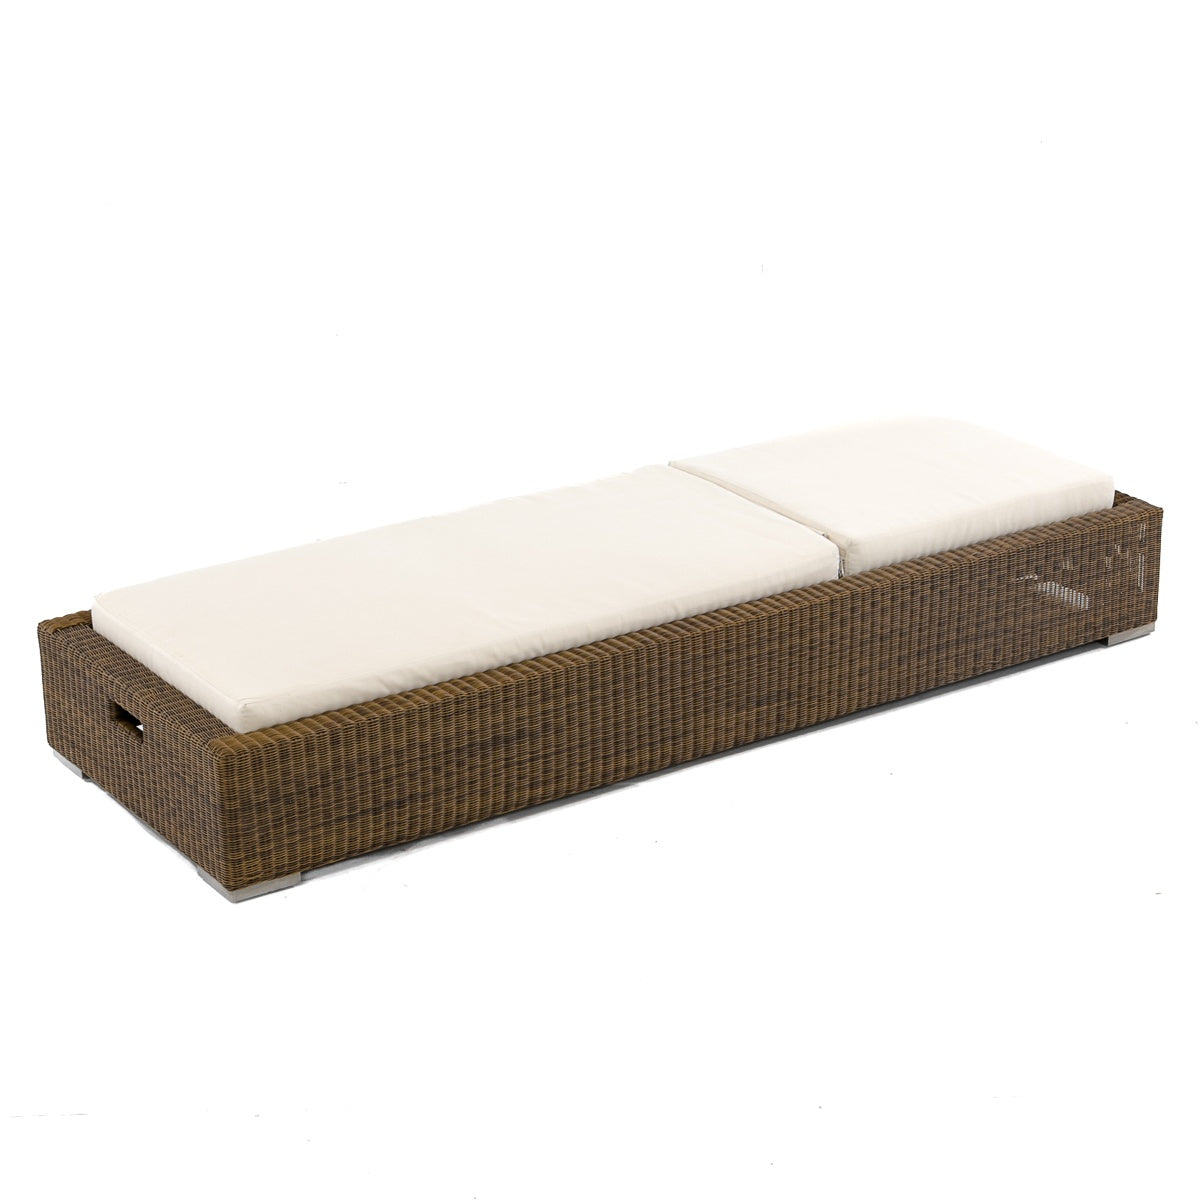 Westminster Teak - Malaga Chaise Synthetic Wicker Lounger - 30002DP